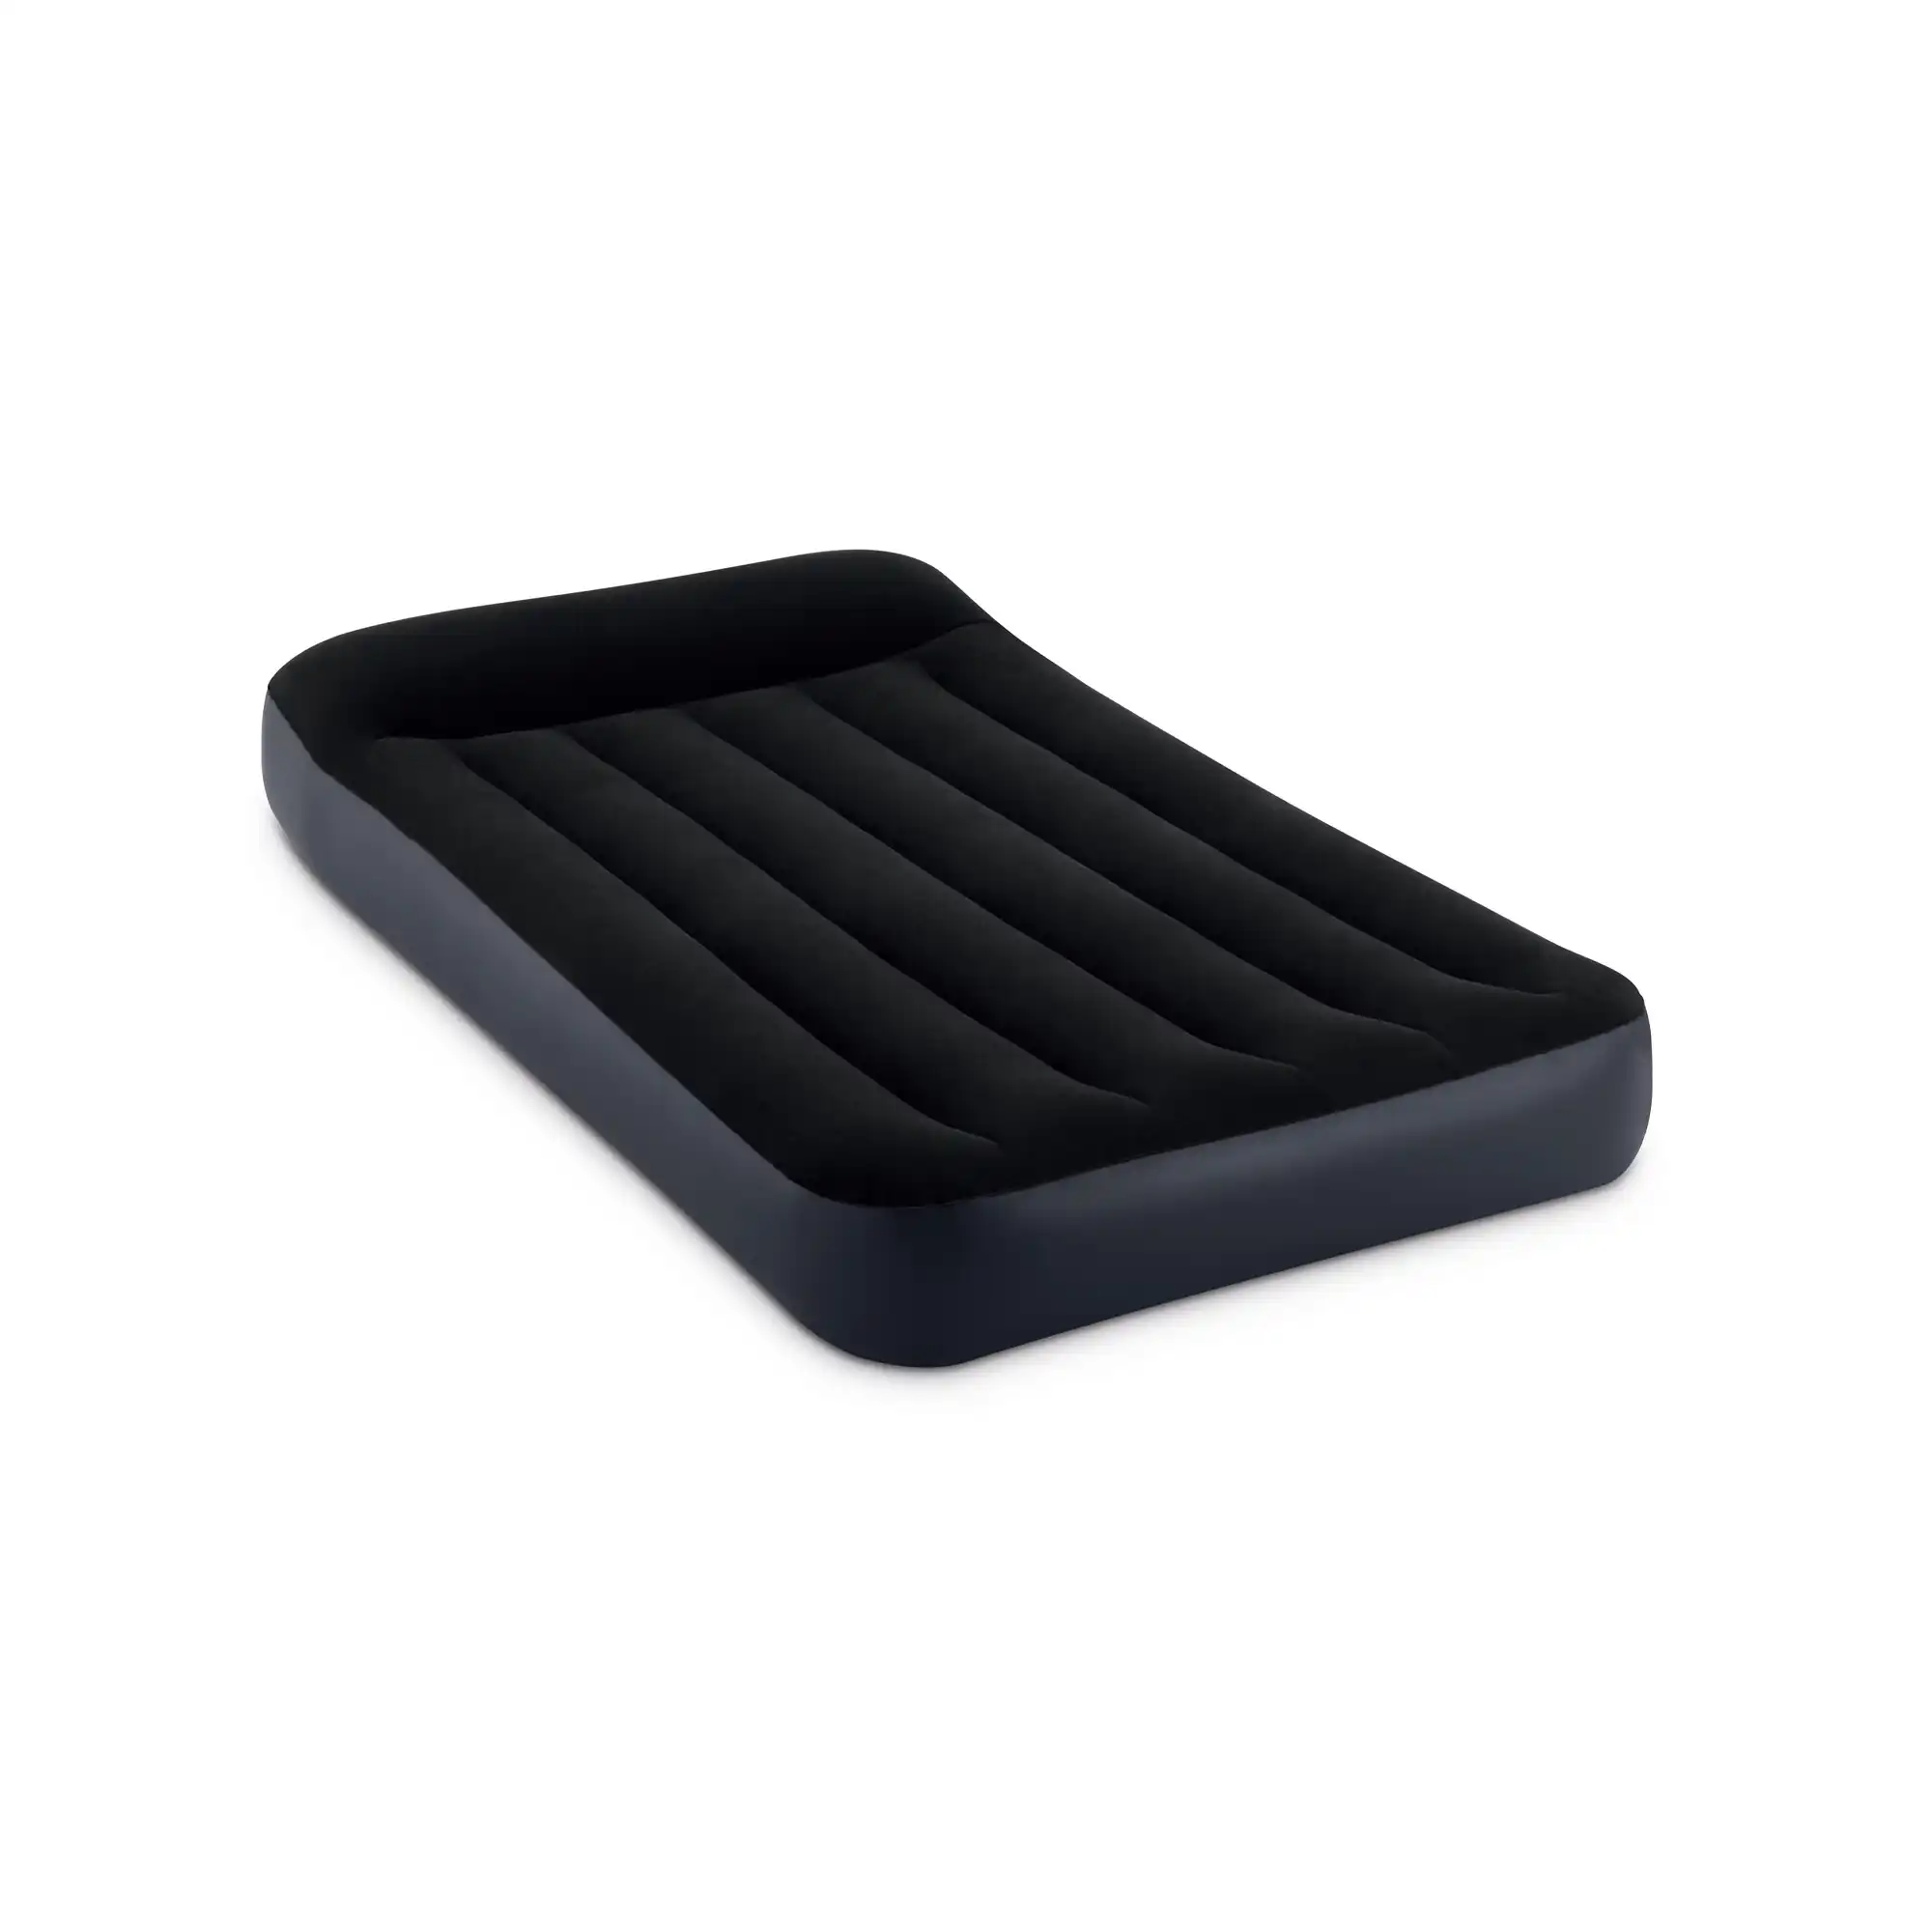 Twin Pillow Rest Classic Airbed